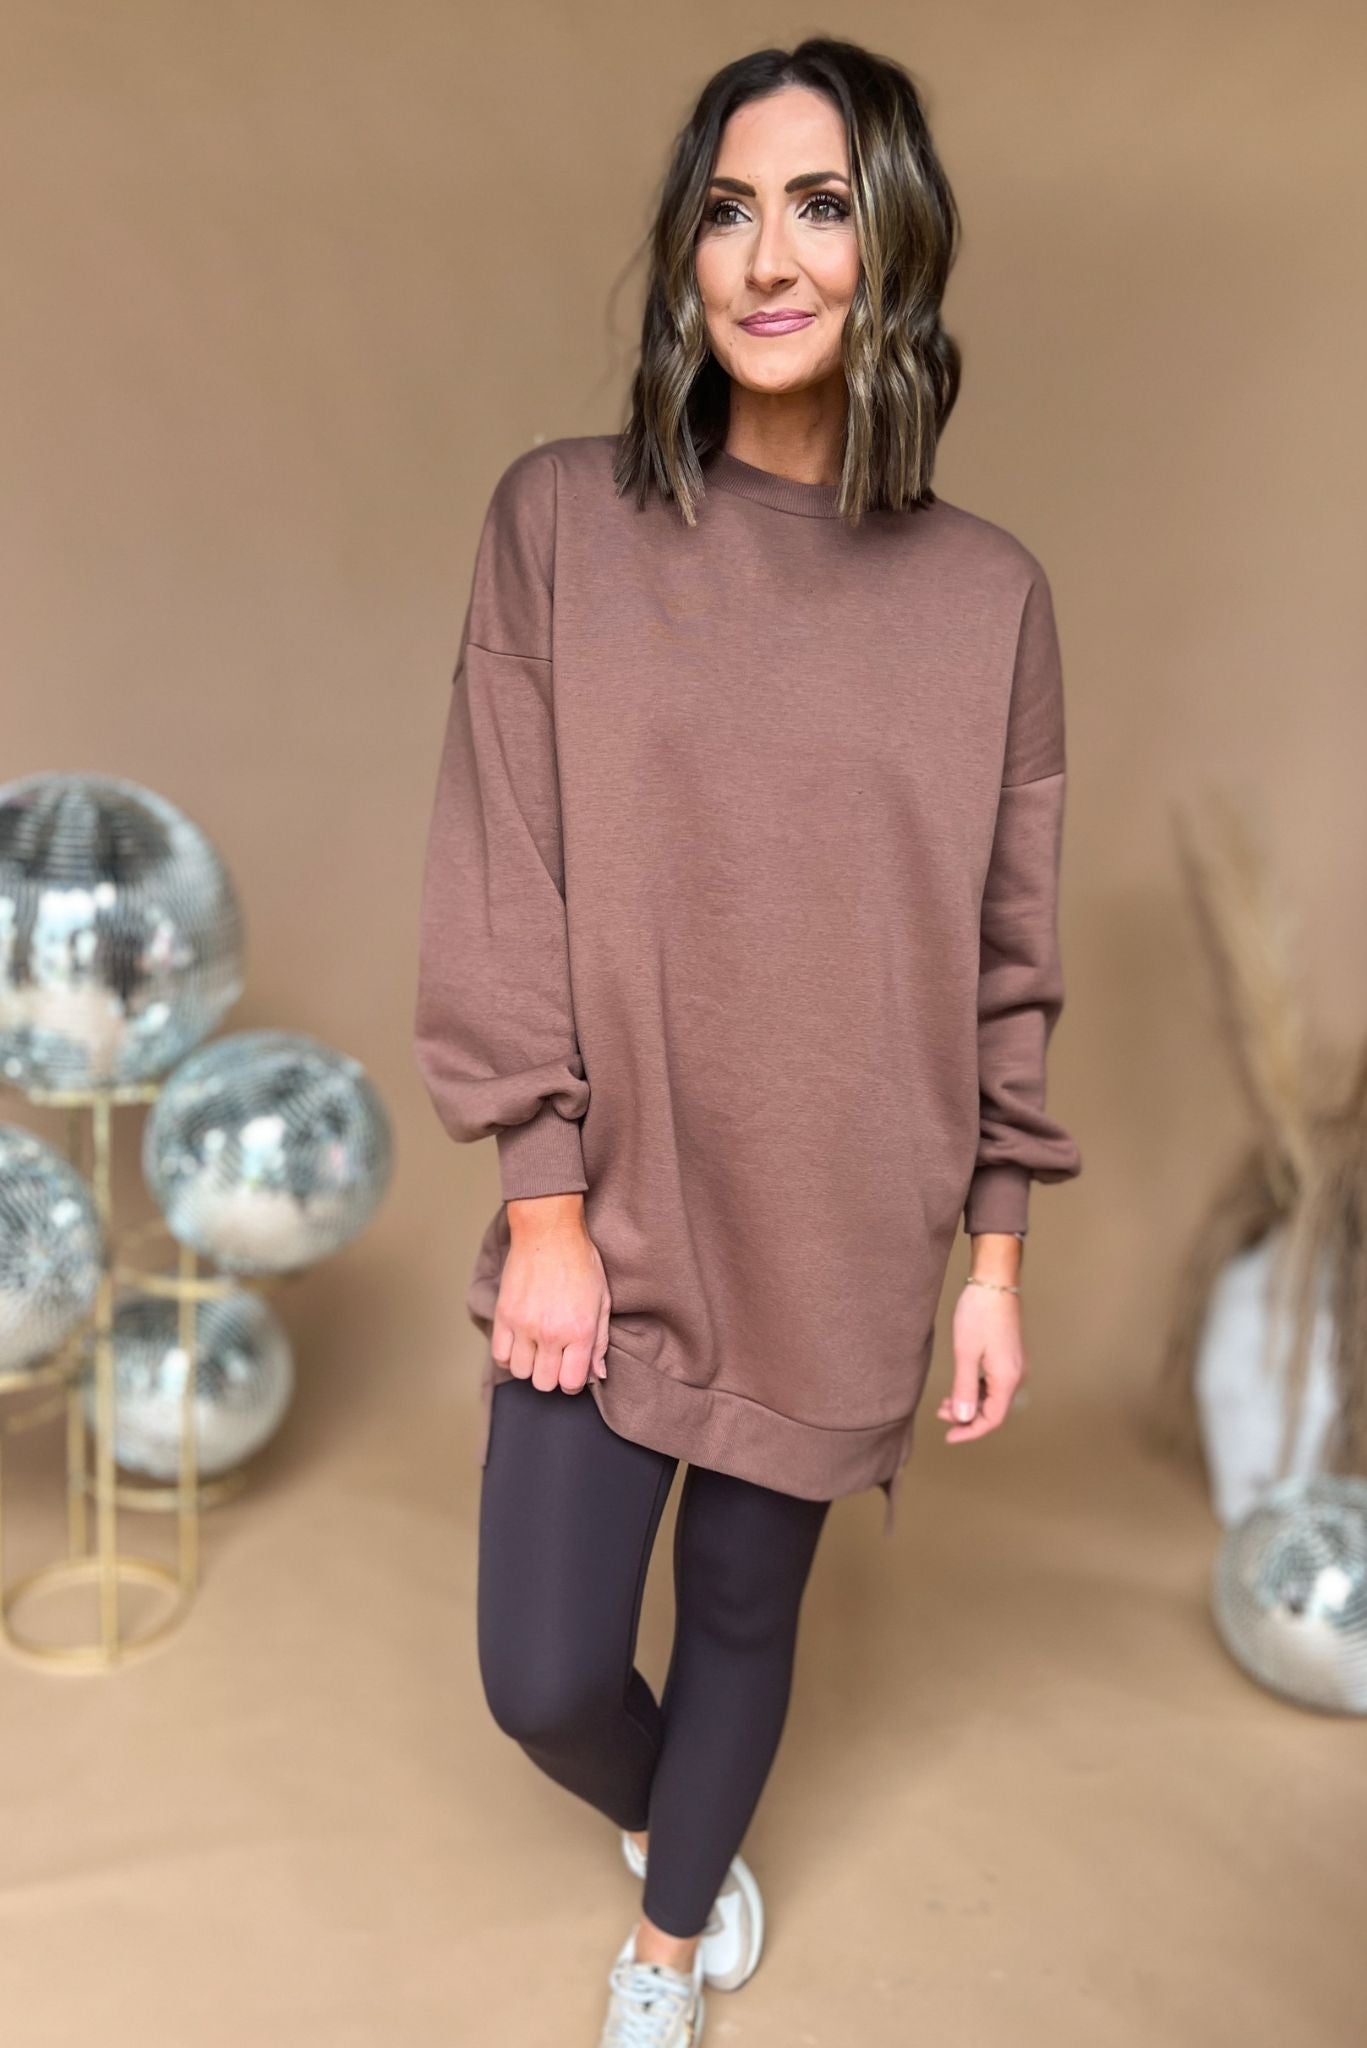 Load image into Gallery viewer, Mocha Round Neck Longline Hi Low Sweatshirt Dress, fall fashion, must have, oversized fit, sweatshirt, travel look, mom style, shop style your senses by mallory fitzsimmons
